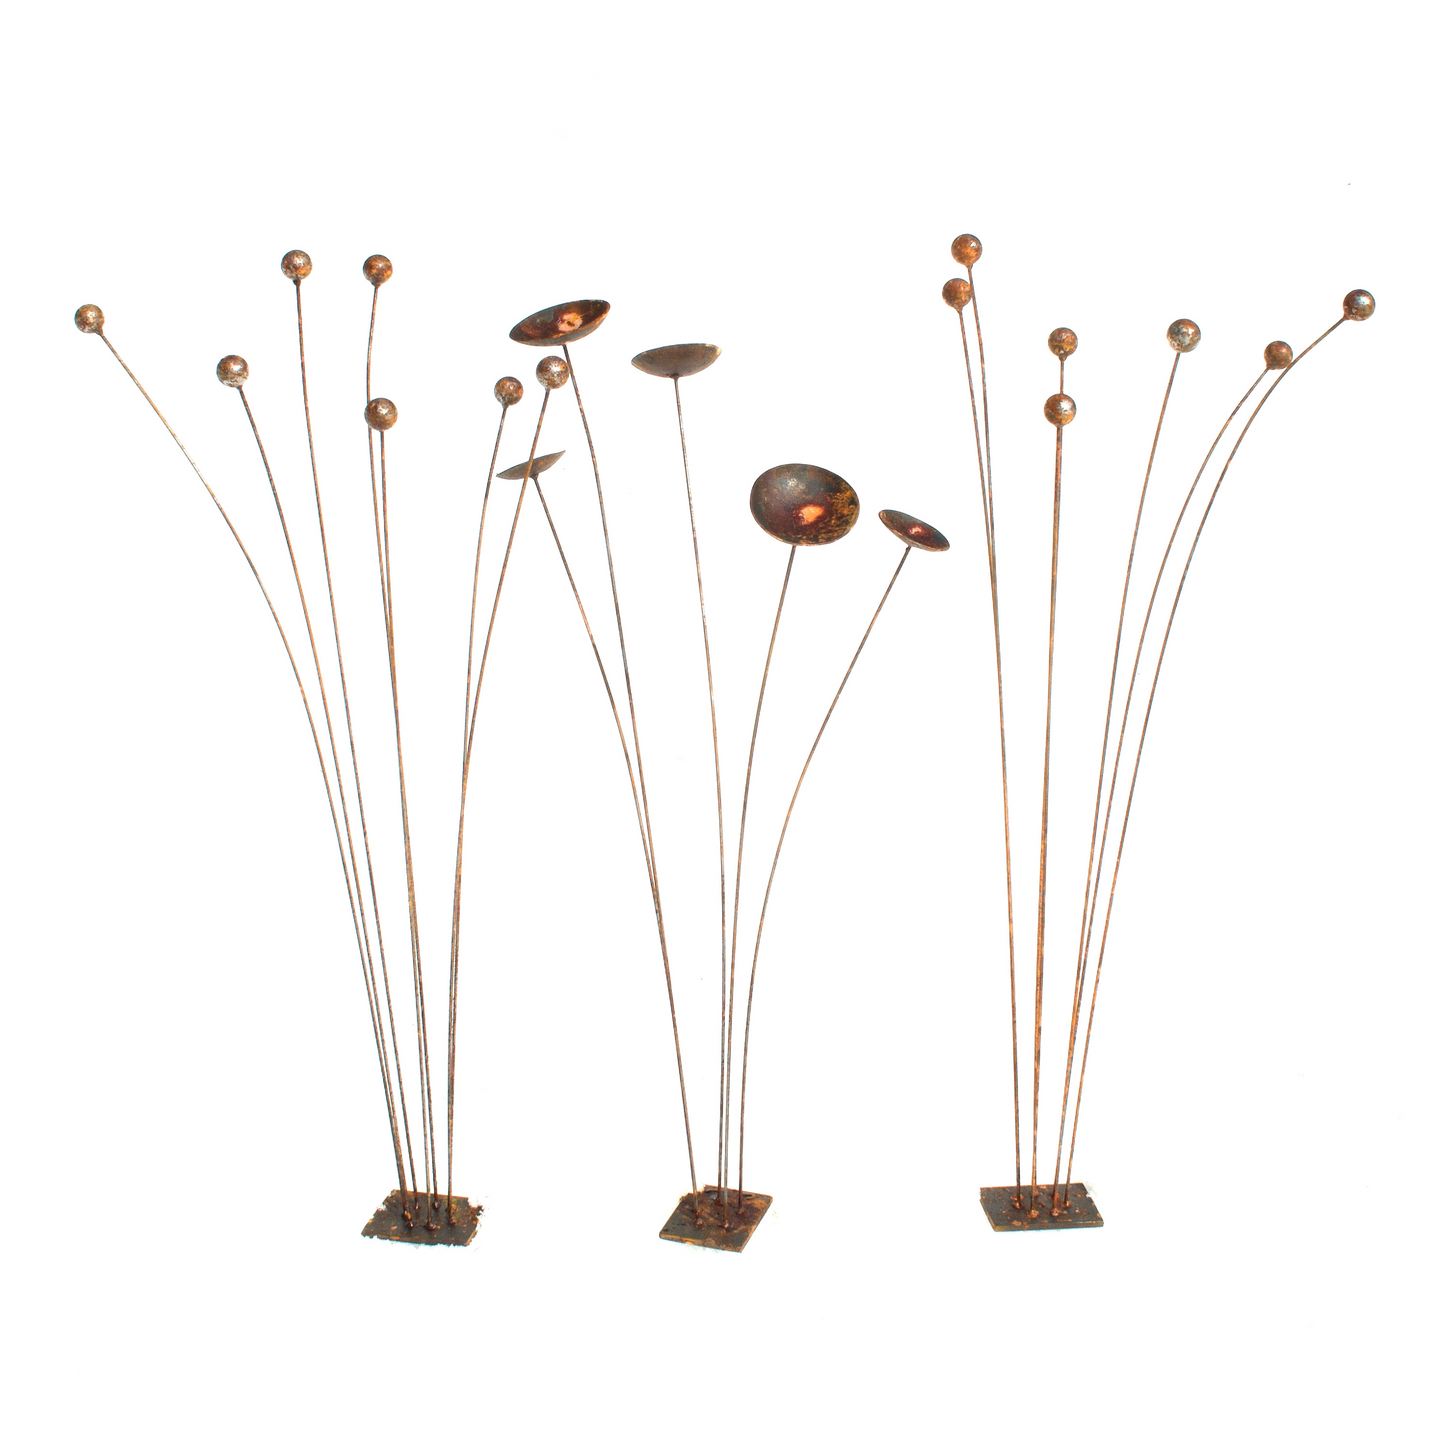 Group of kinetic metal garden art. Stems with buds and bowl shaped flowers